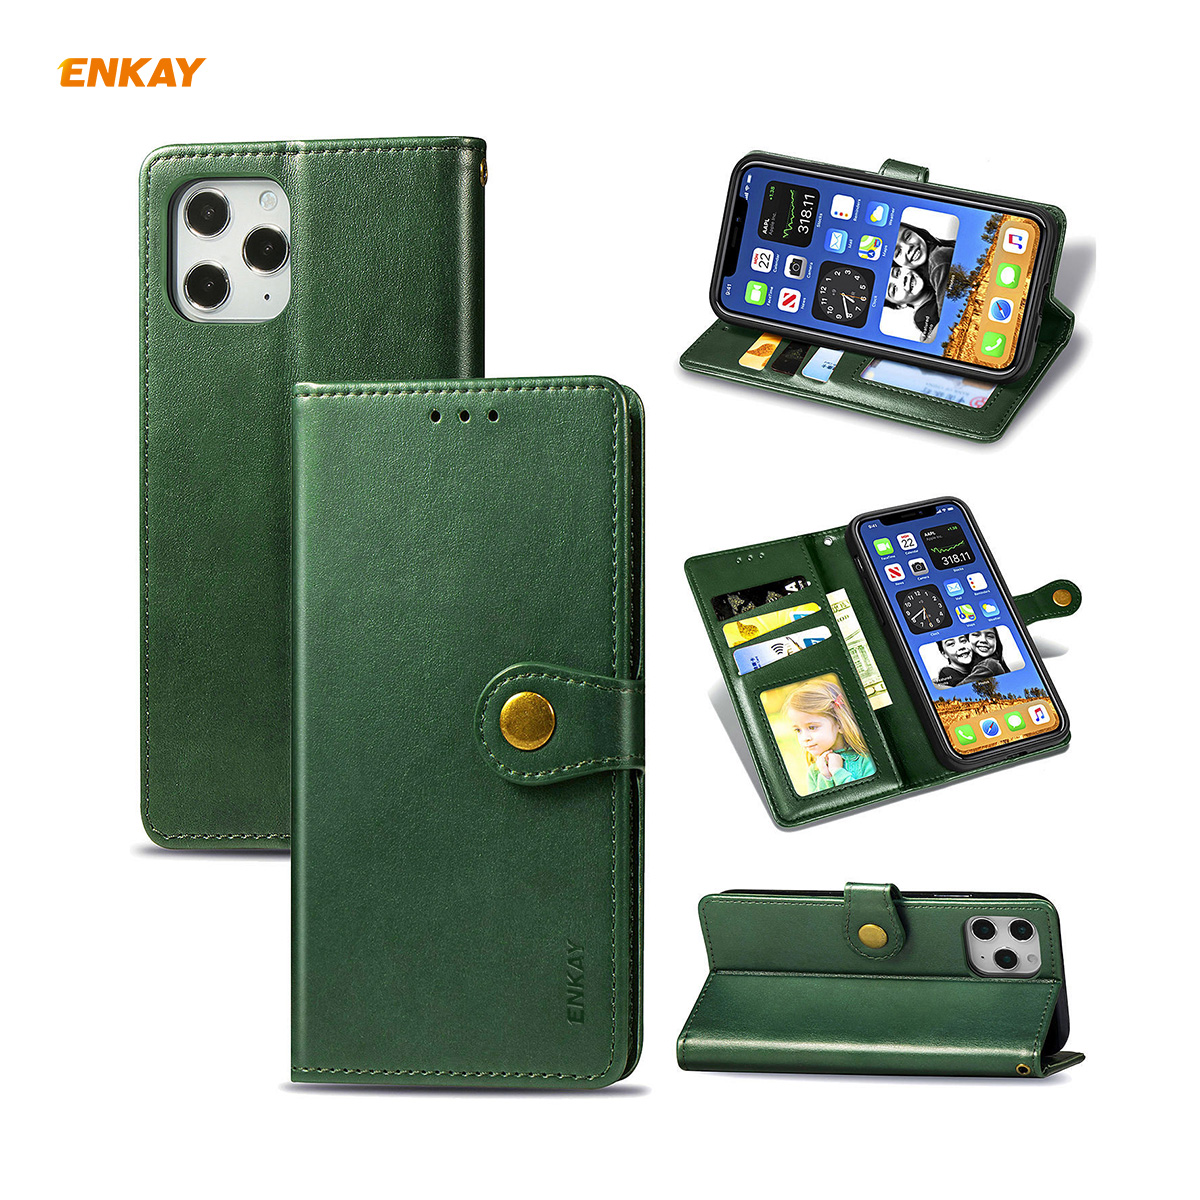 Enkay-for-iPhone-12-Pro-Max-Case-Retro-Litchi-Pattern-Flip-with-Mutiple-Card-Slots-Wallet-Stand-PU-L-1755116-9